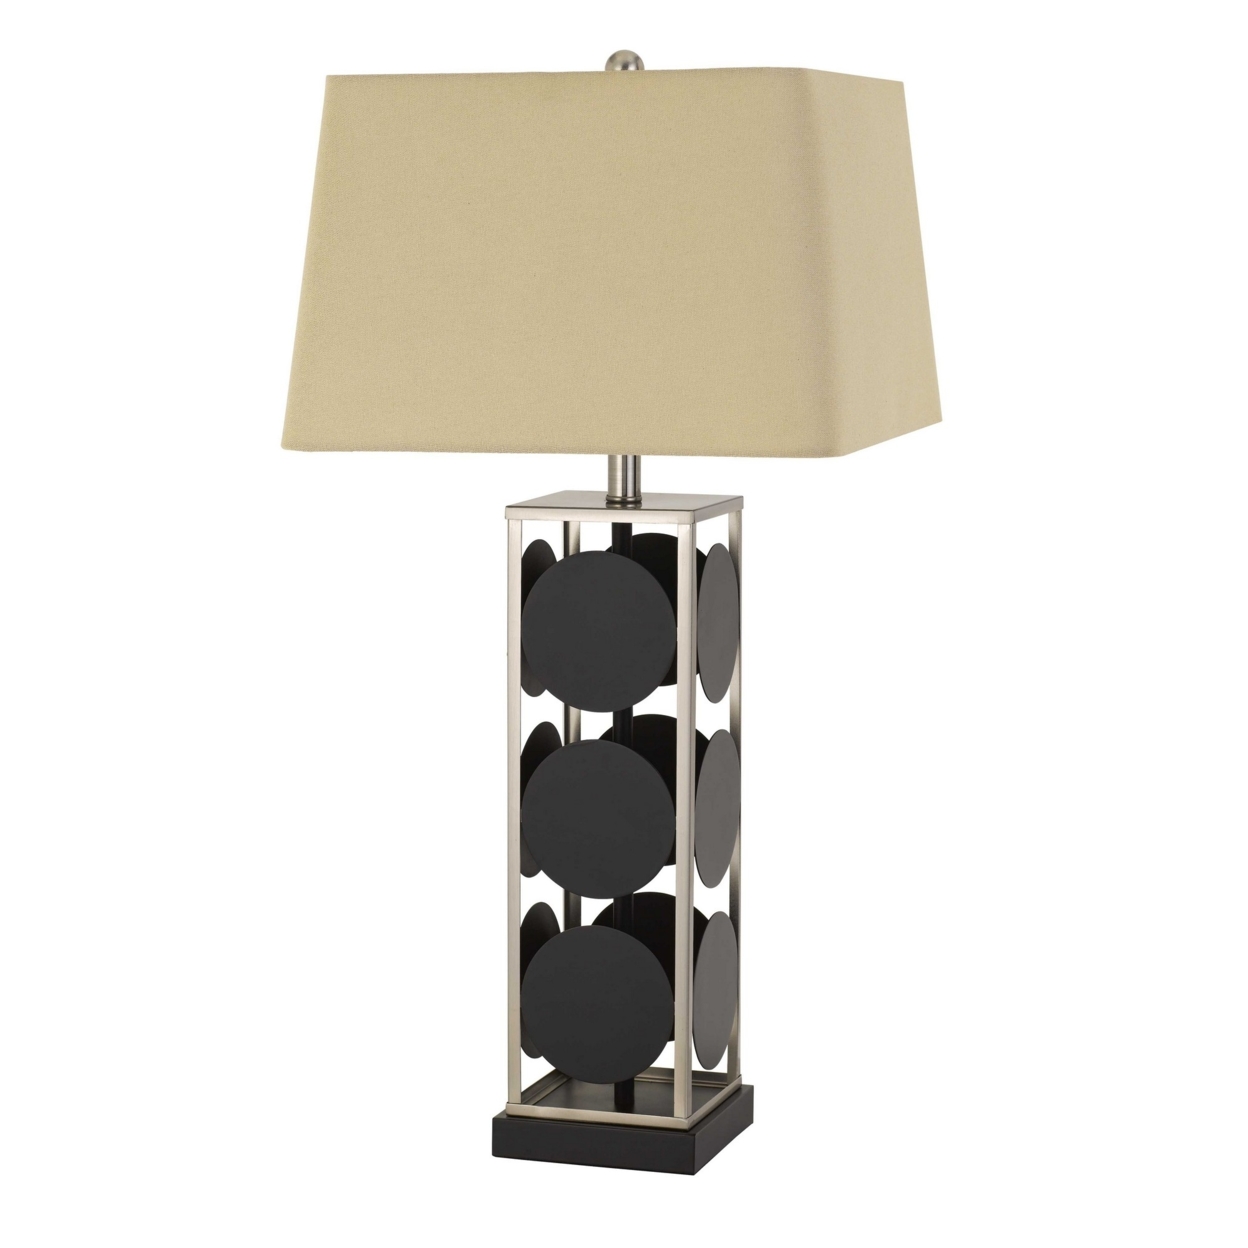 31.5 Metal Table Lamp With Geometric Accents, Black And Silver- Saltoro Sherpi